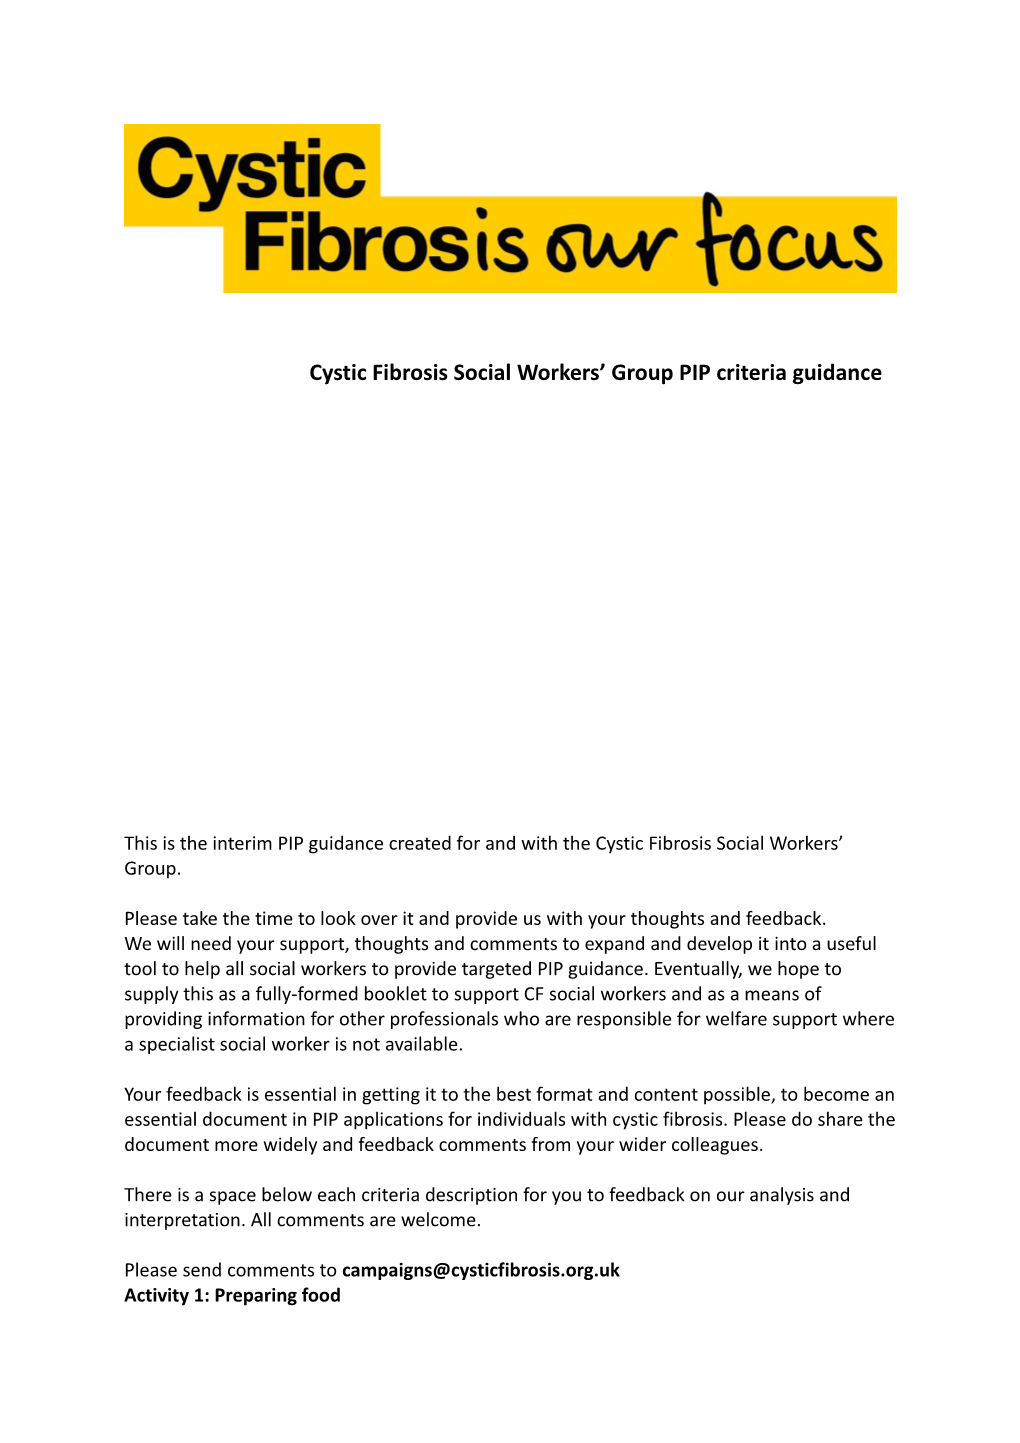 Cystic Fibrosis Social Workers Group PIP Criteria Guidance